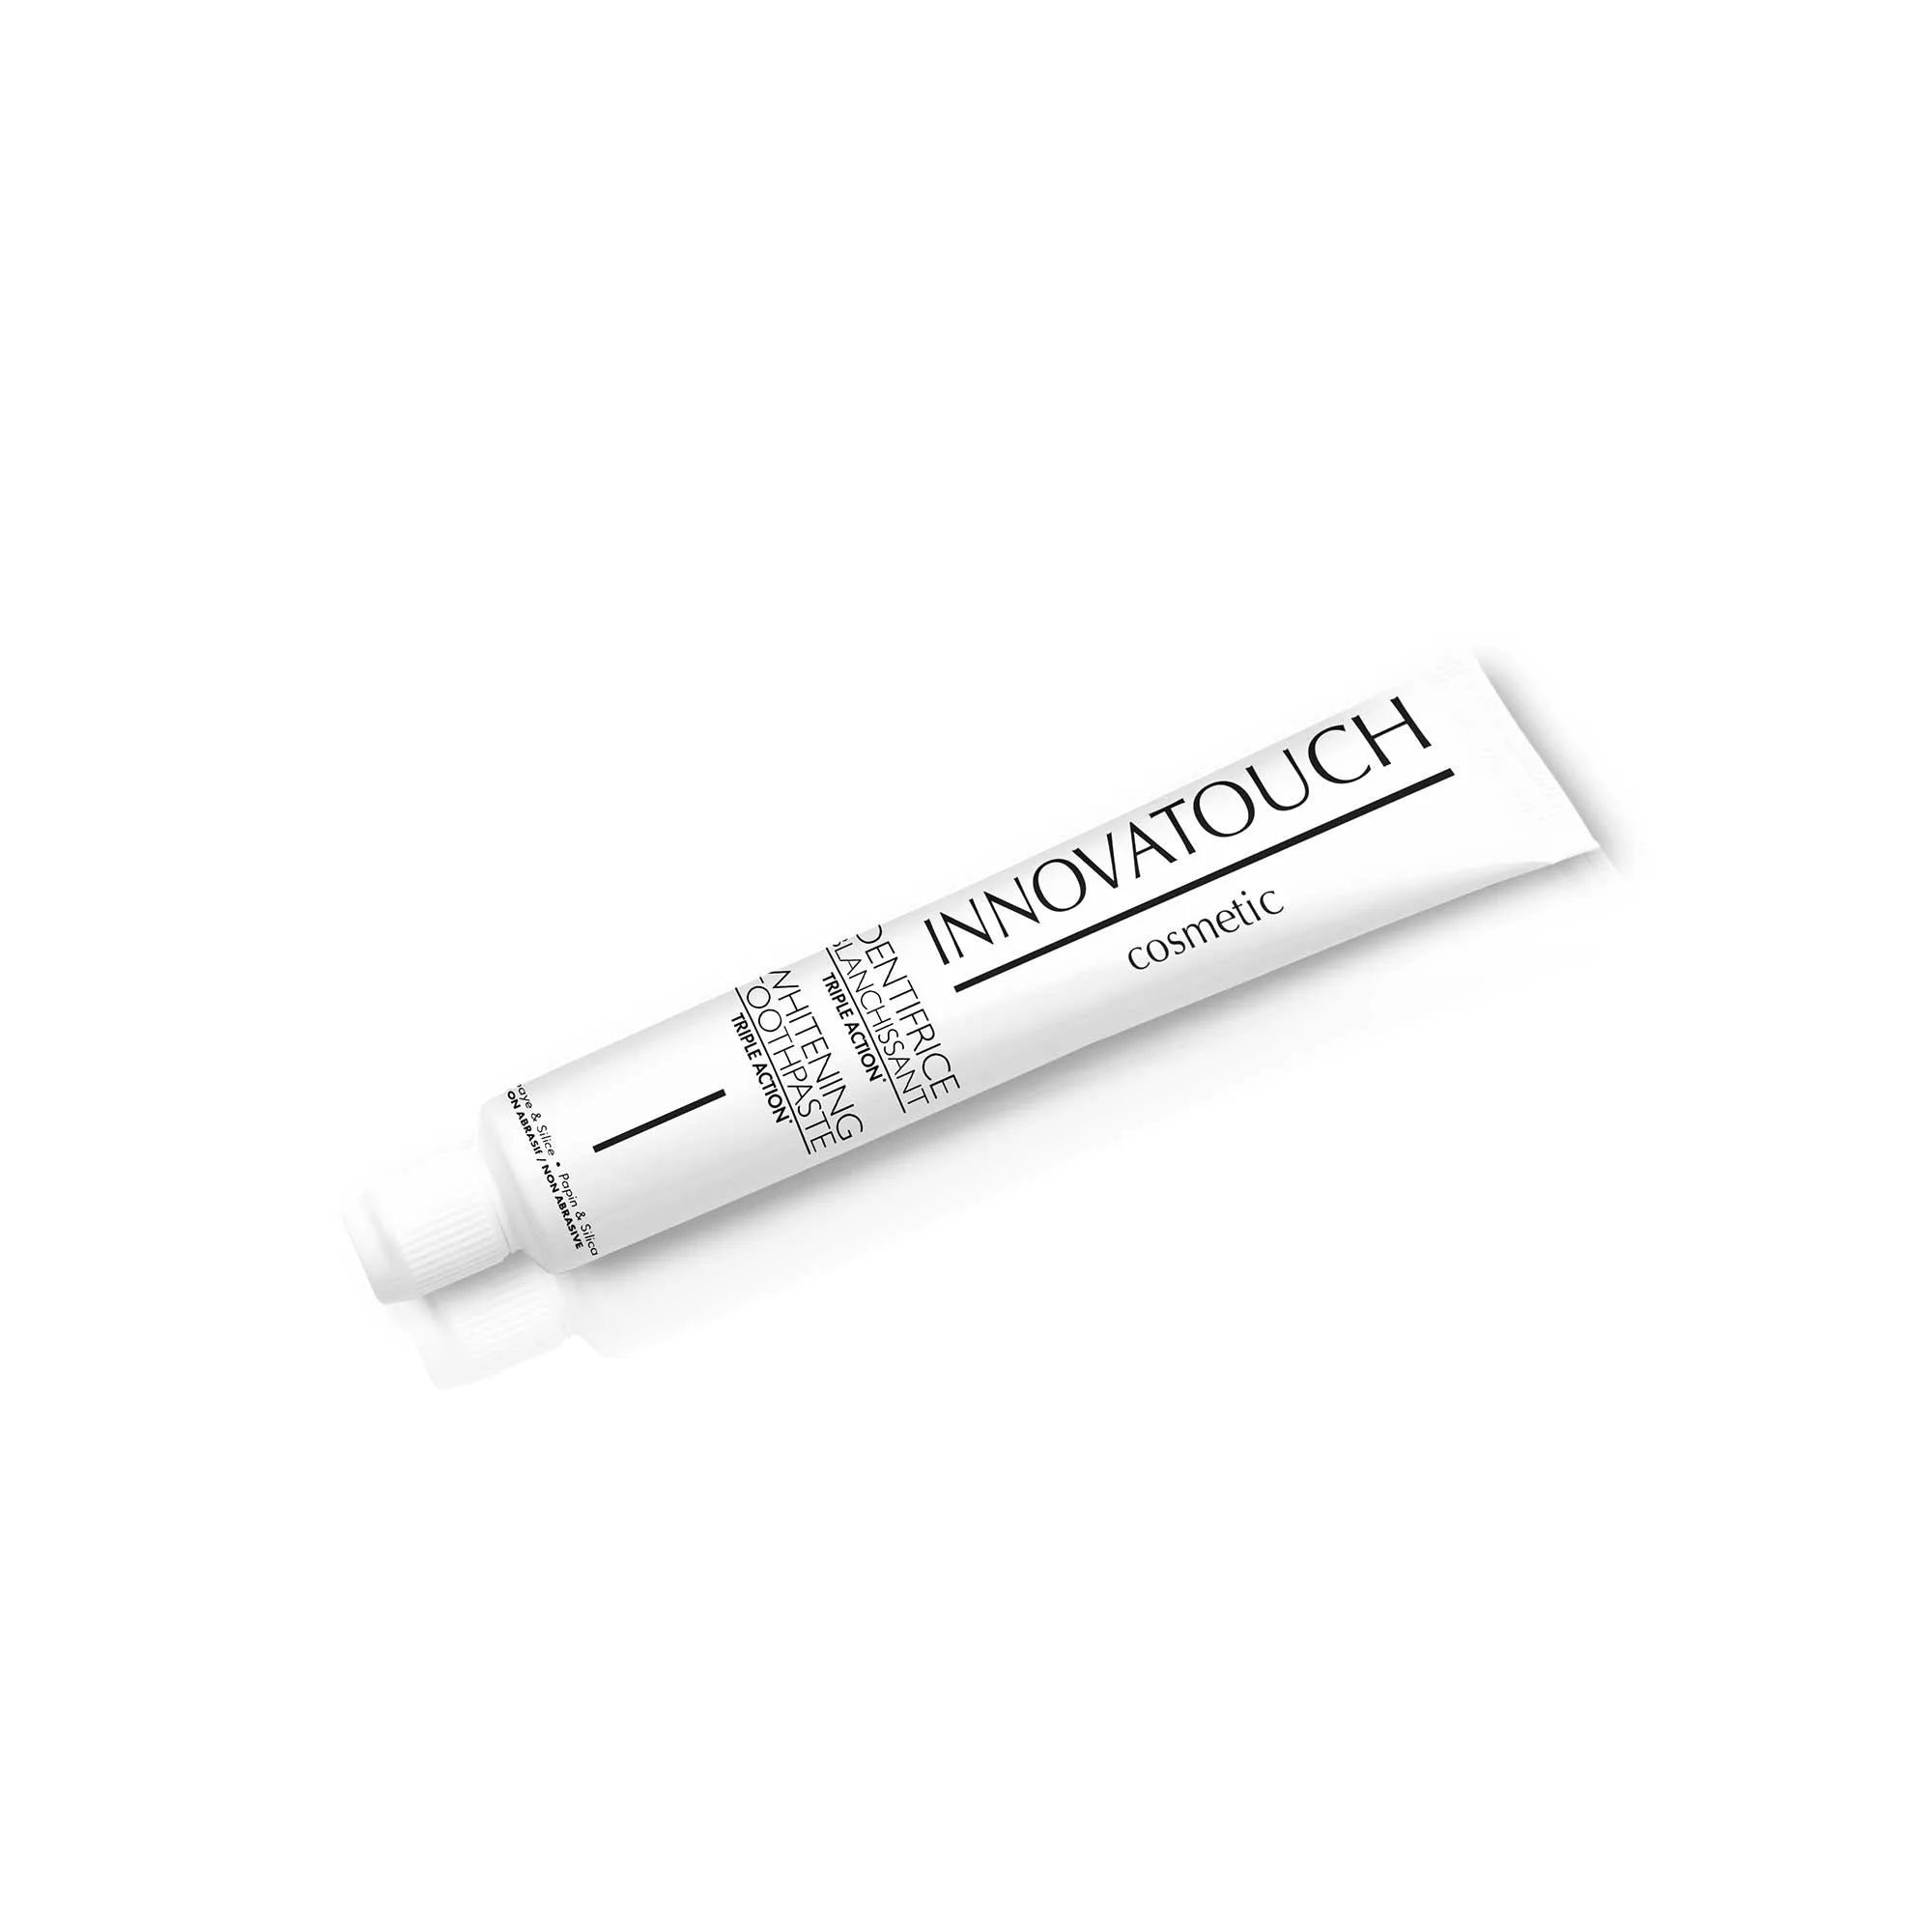 CHARBON-dentifrice-triple-2-action-innovatouch-cosmetic